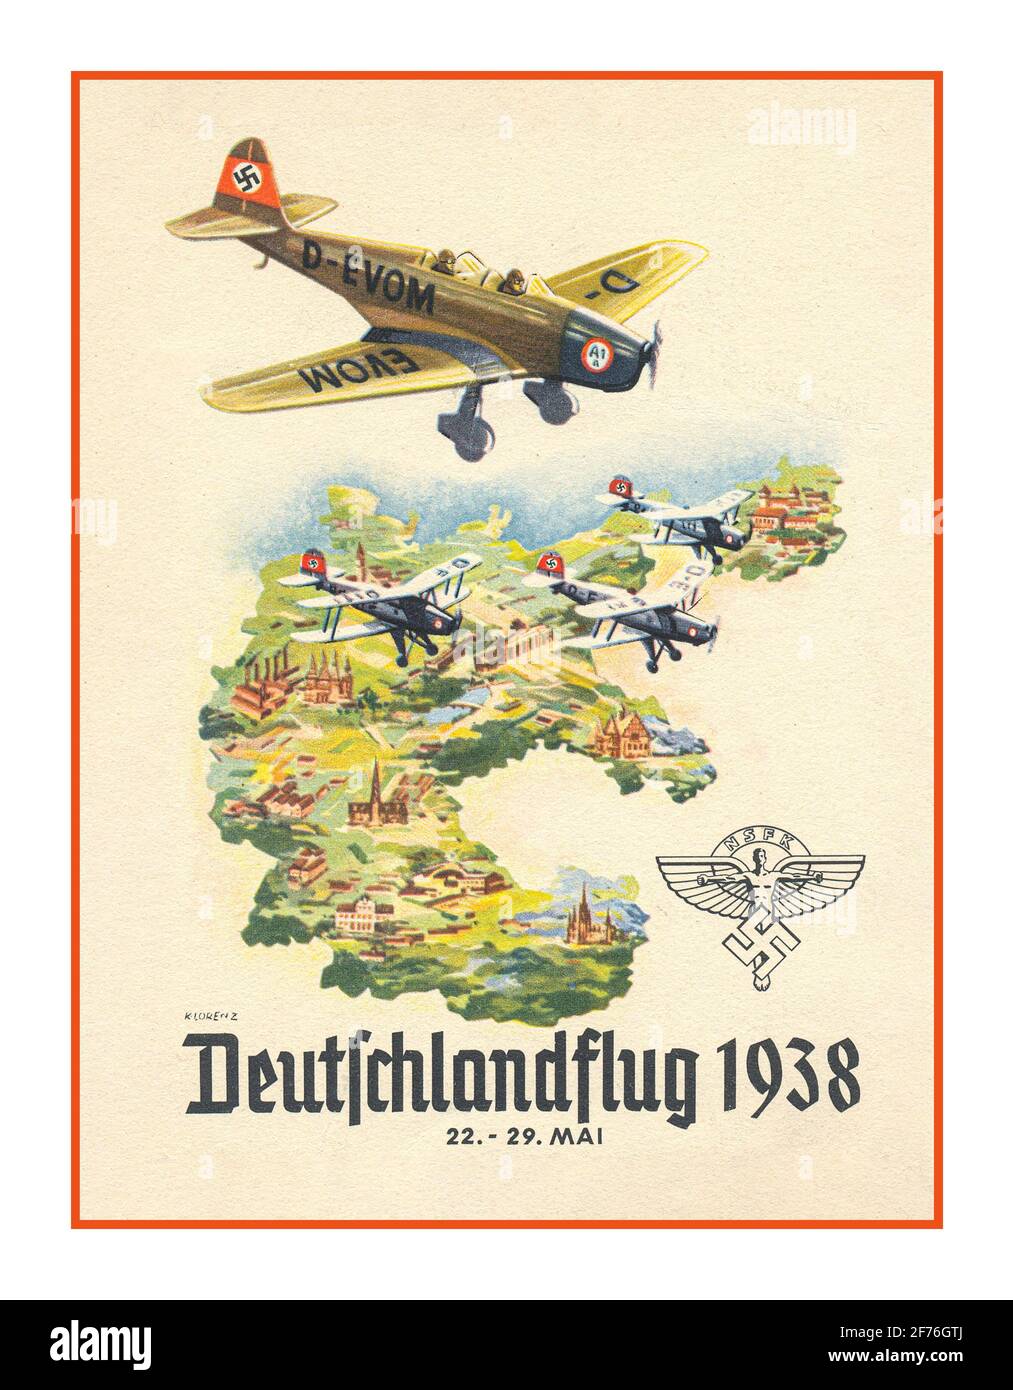 Vintage Nazi Propaganda Card Poster for 'Deutschlandflug 1938.  Germany Propaganda Card Poster for NSFK 'Deutschlandflug 1938. with German aircraft displaying swastika tail fins flying over Germany. The National Socialist Flyers Corps (German: Nationalsozialistisches Fliegerkorps; NSFK) was a paramilitary organization of the Nazi Party. Stock Photo